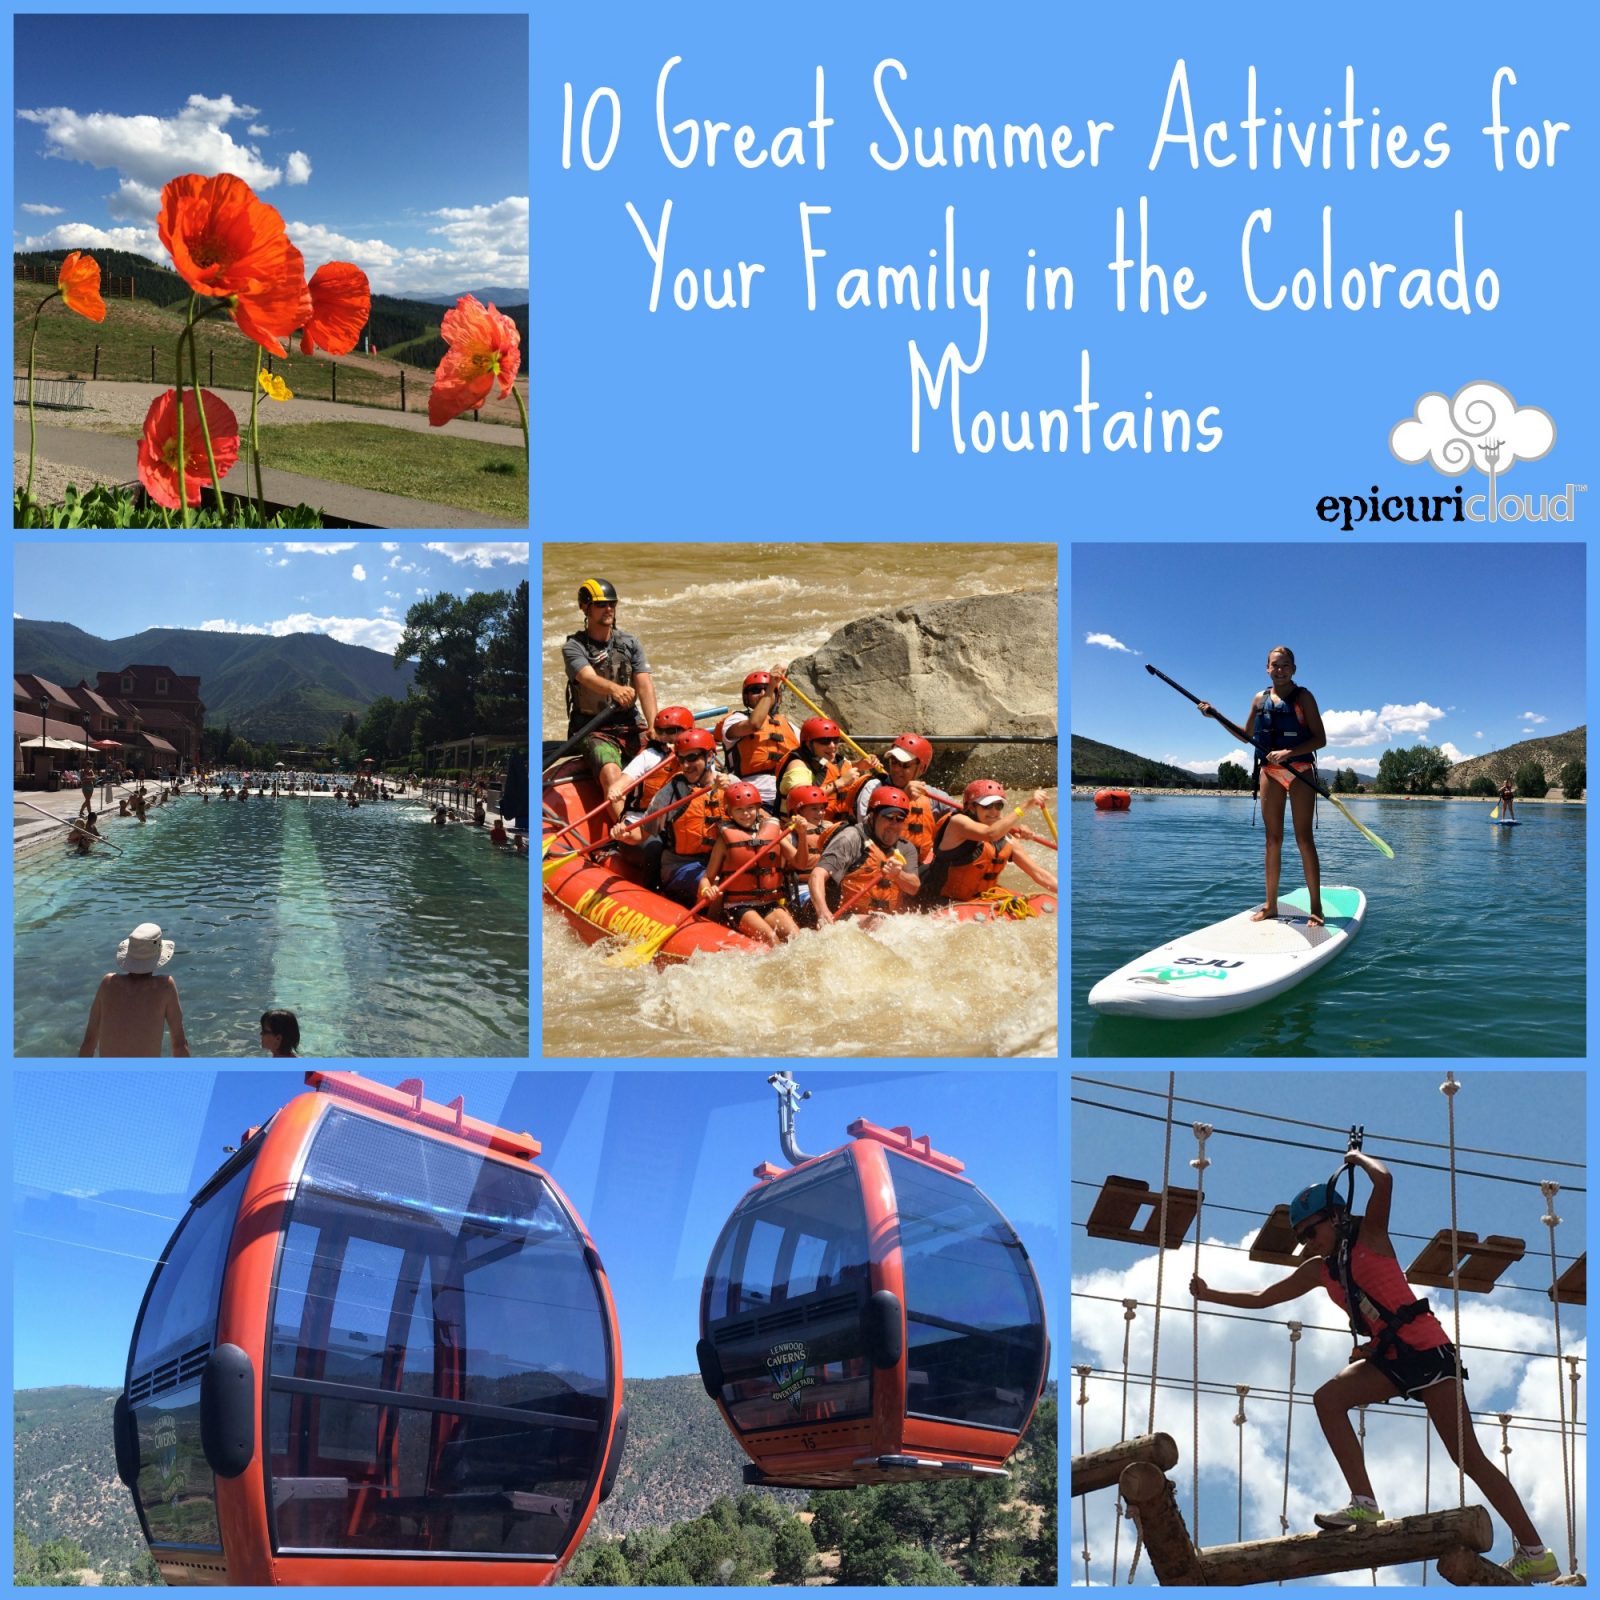 10 Great Summer Activities for Your Family in the Colorado Mountains epicuricloud (Tina Verrelli) image